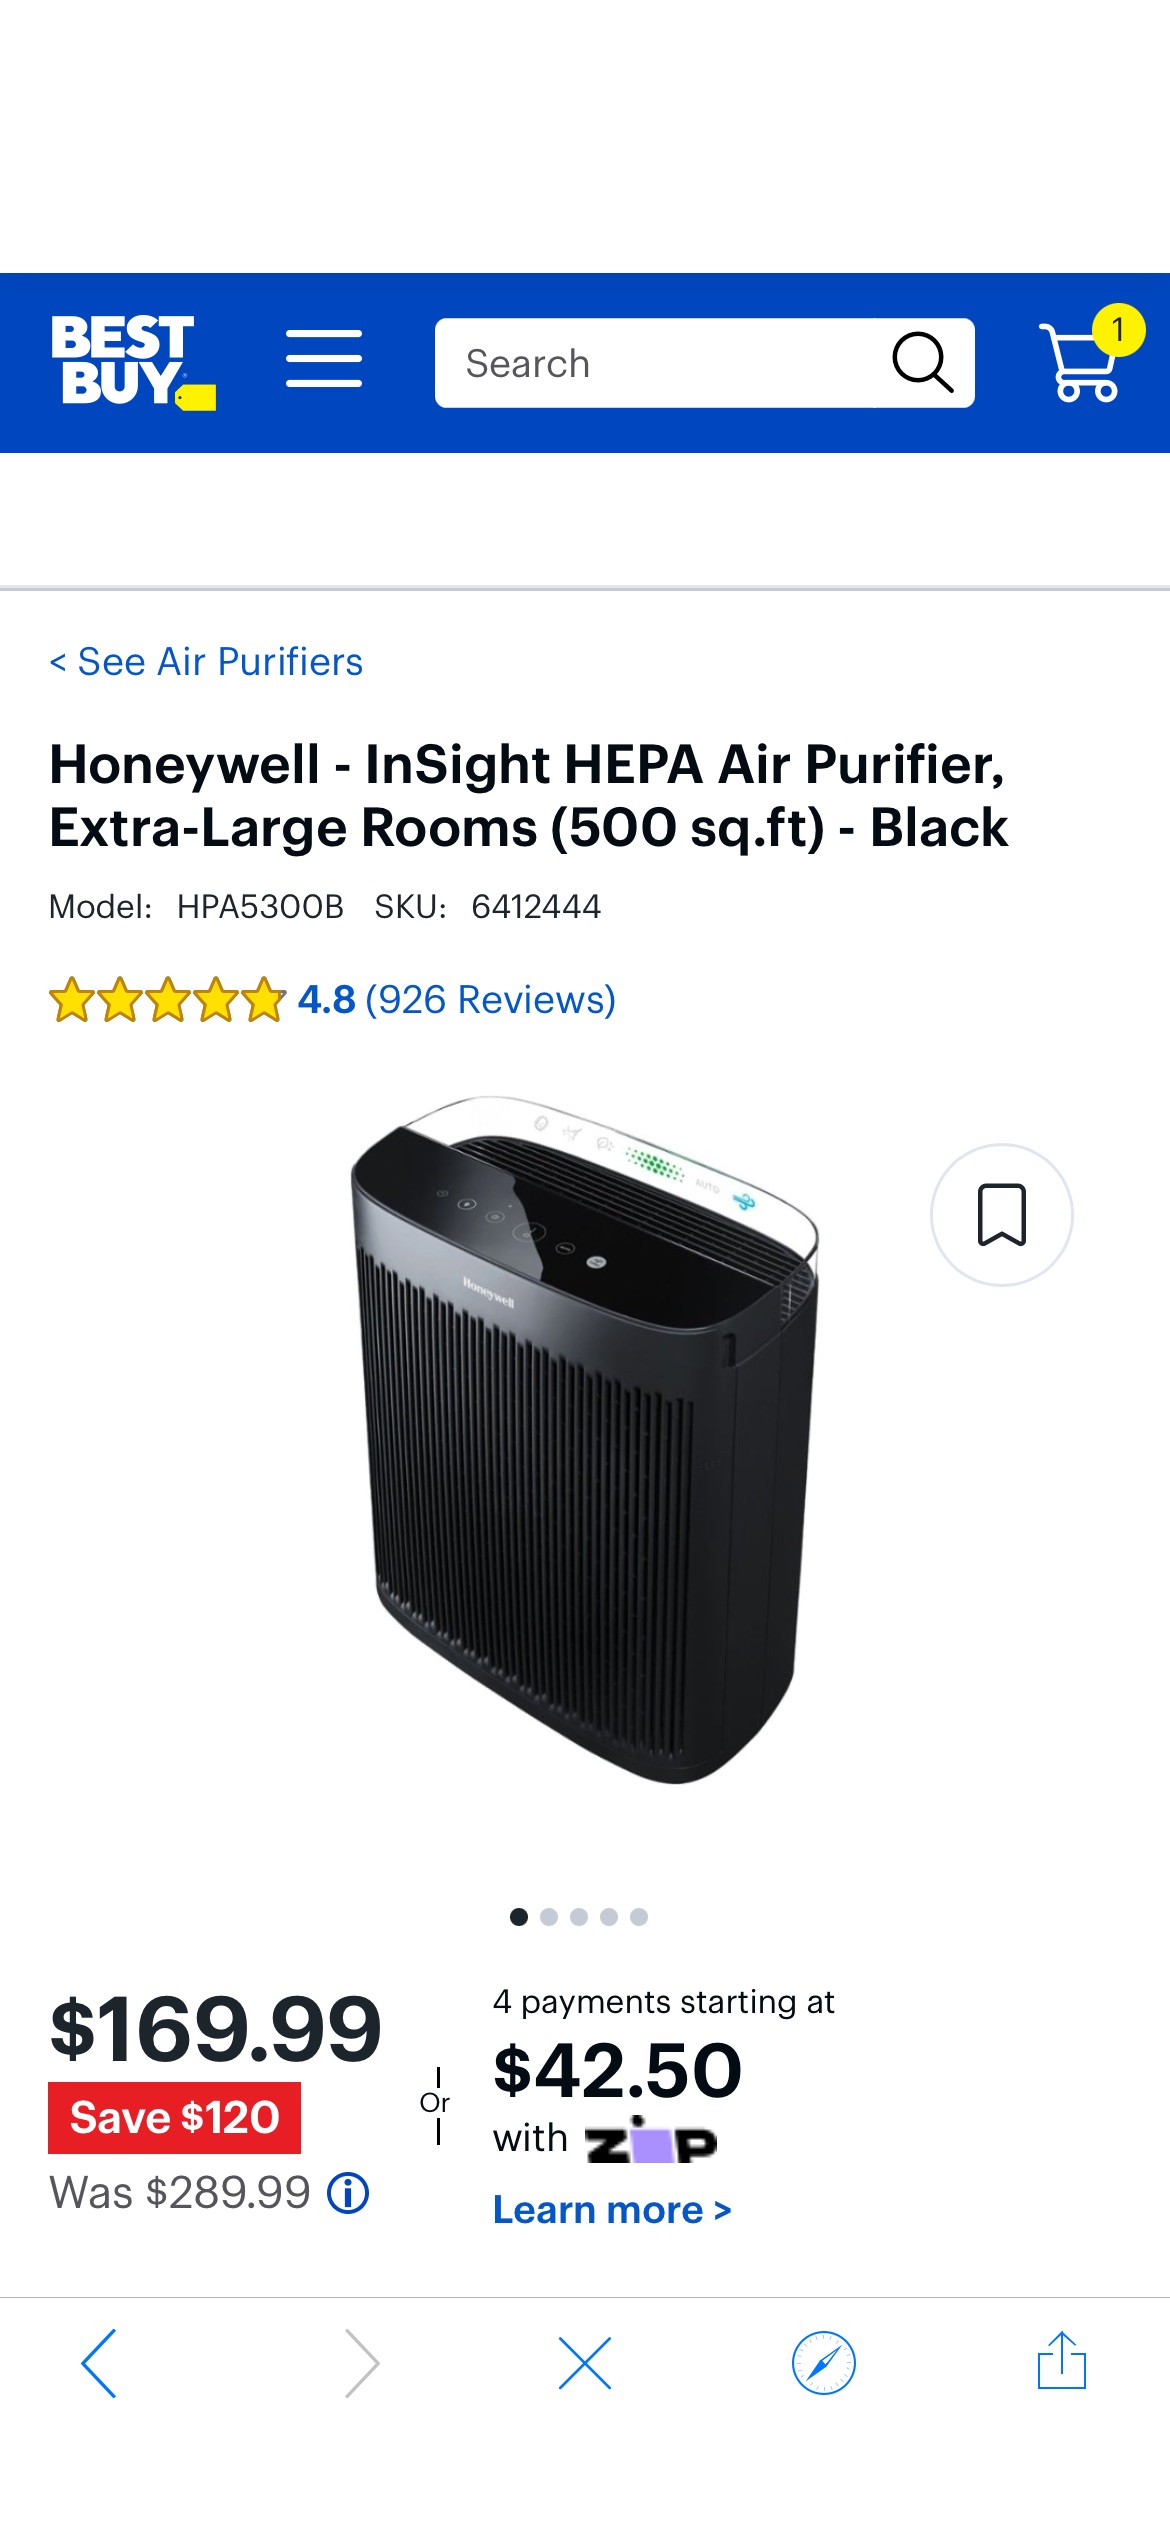 Honeywell InSight HEPA Air Purifier, Extra-Large Rooms (500 sq.ft) Black HPA5300B - Best Buy